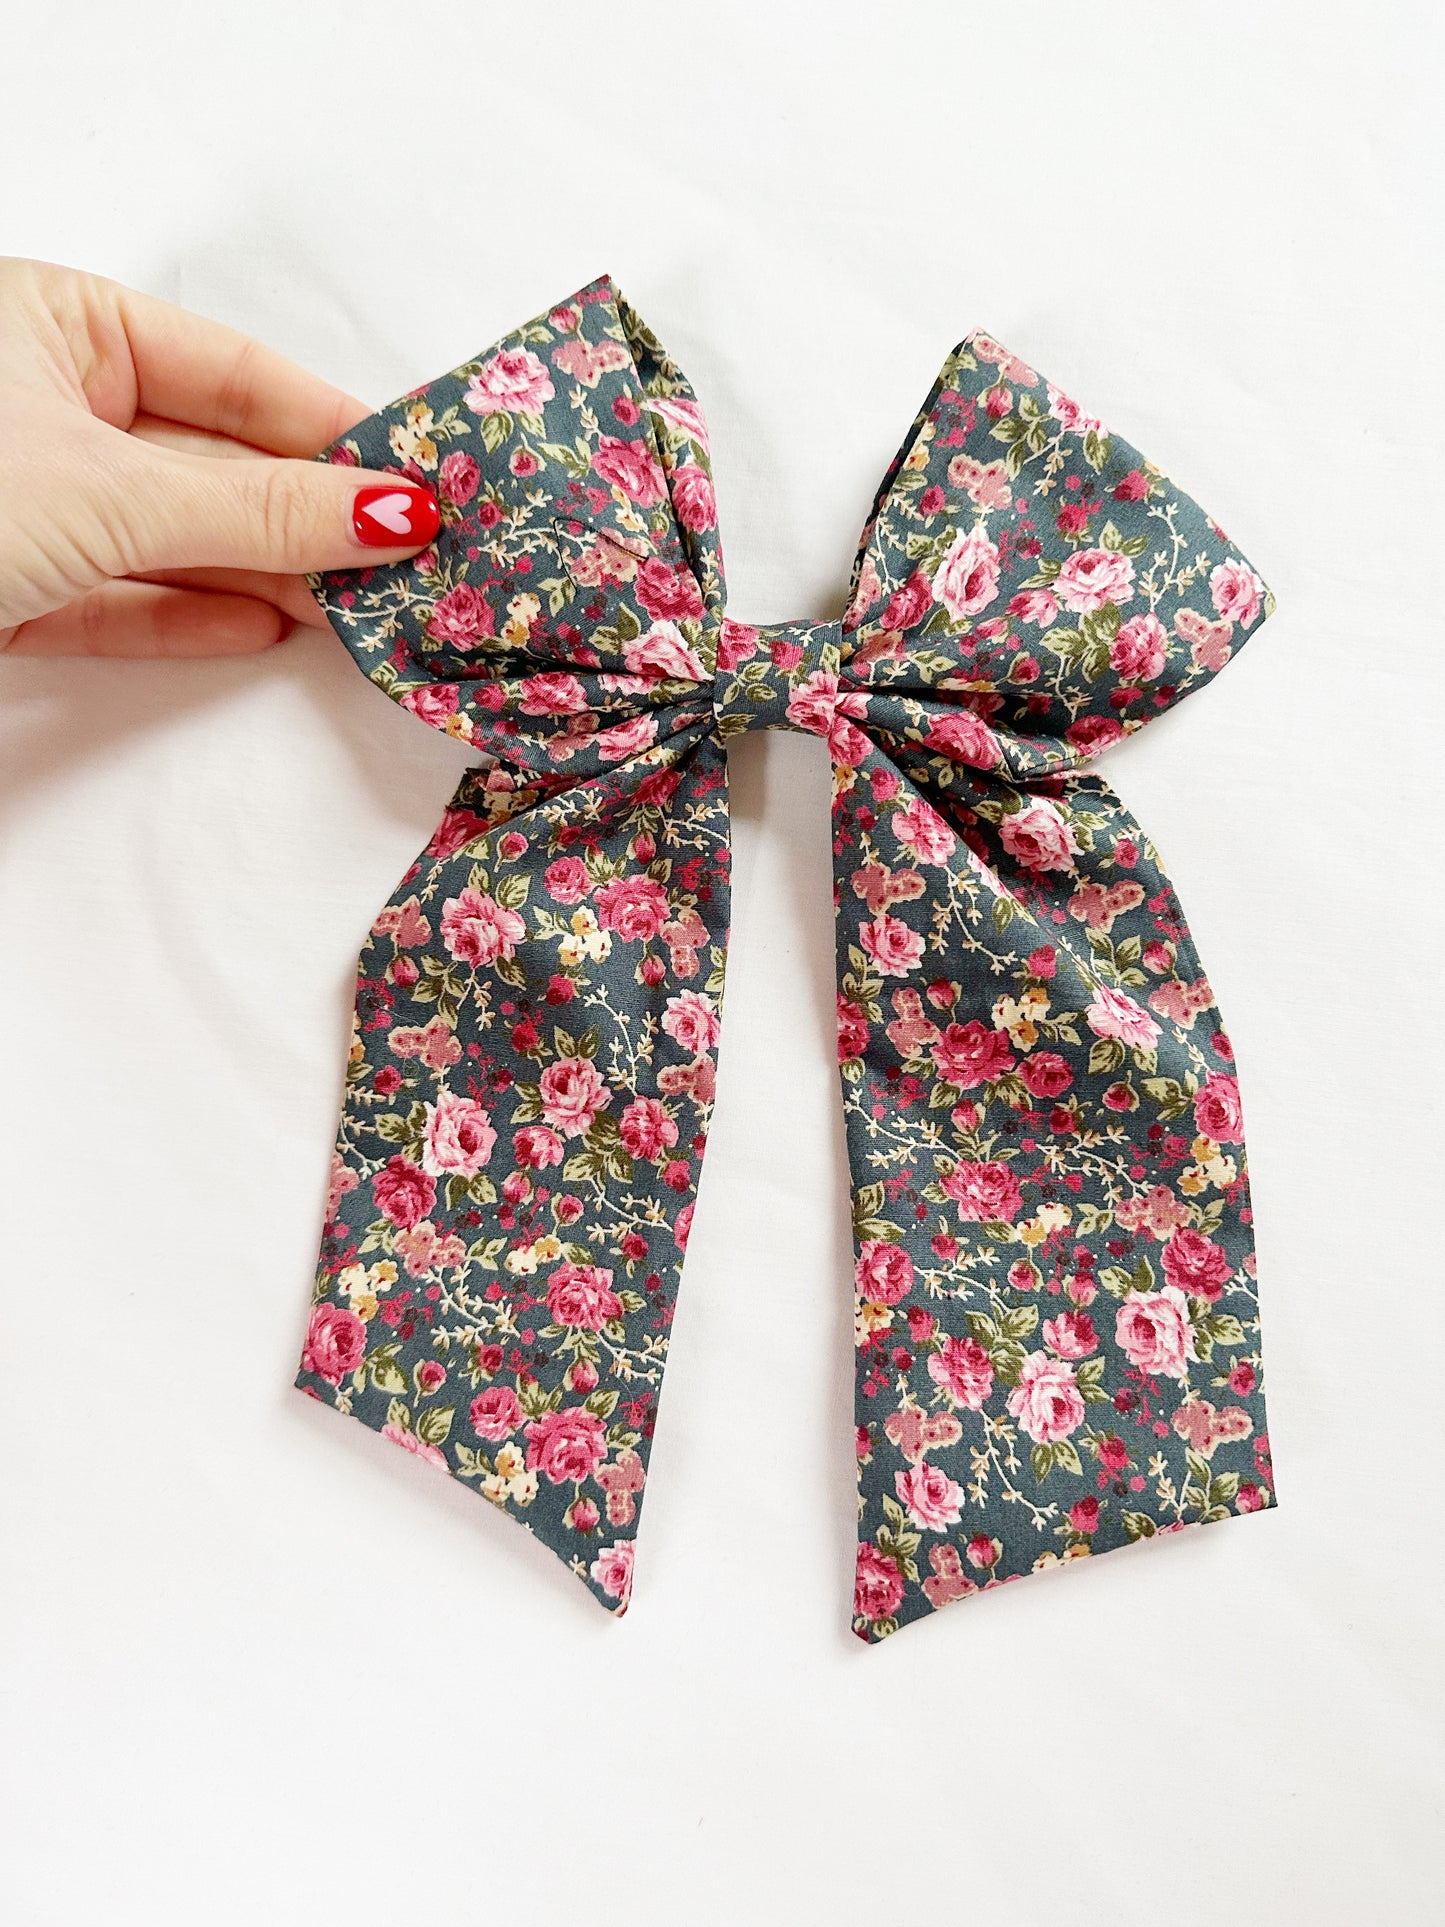 POWER Hair Bow in pink and grey floral cotton